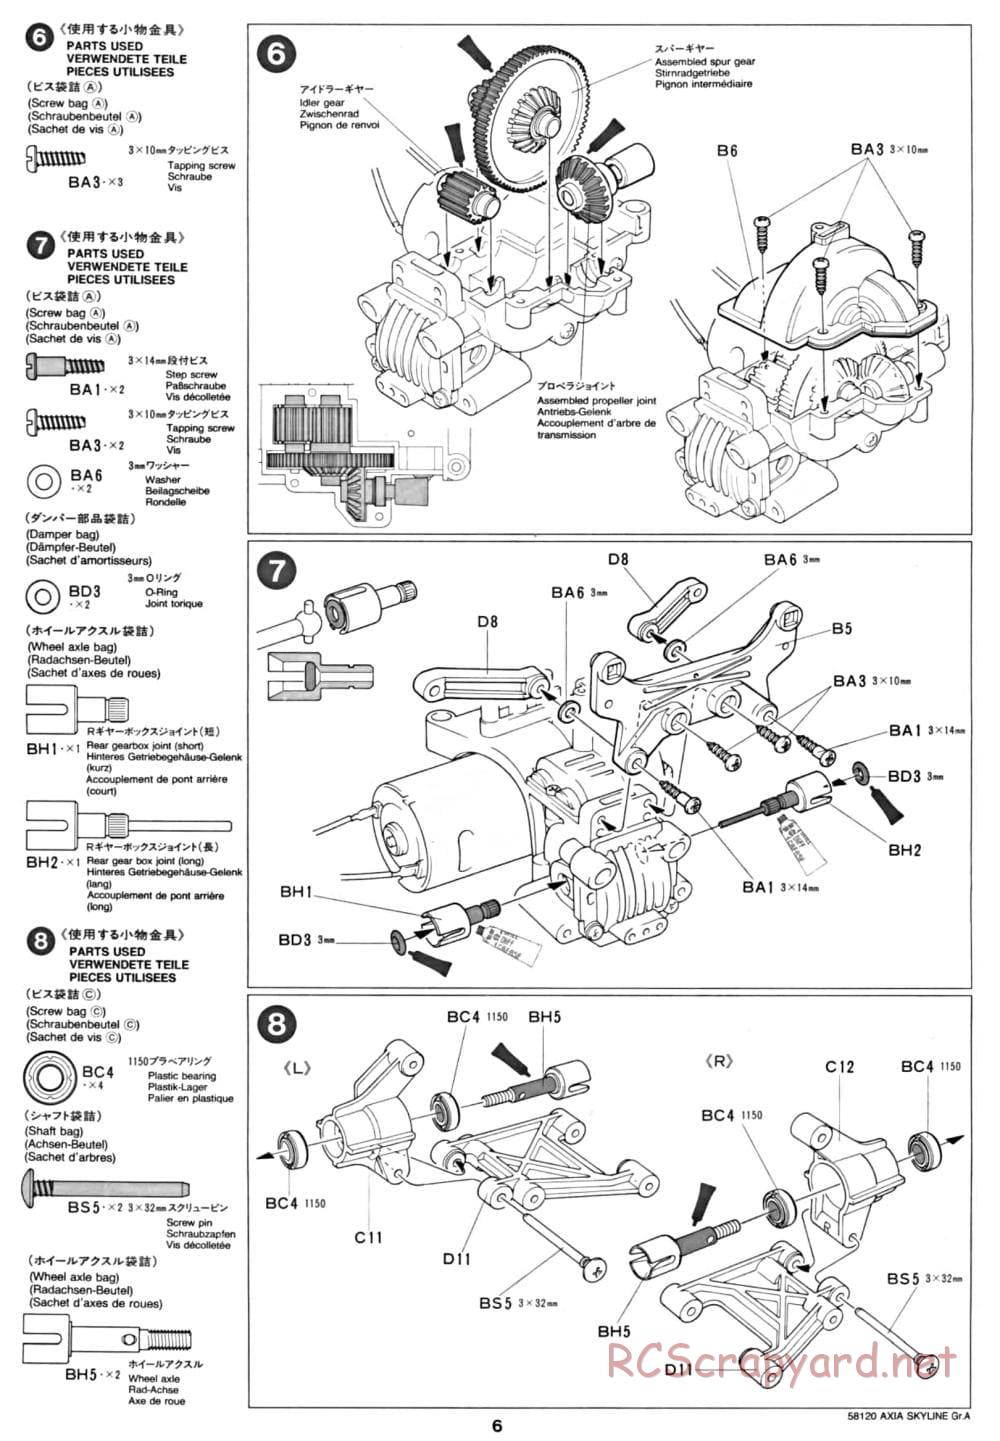 Tamiya - Axia Skyline GT-R Gr.A - TA-01 Chassis - Manual - Page 6